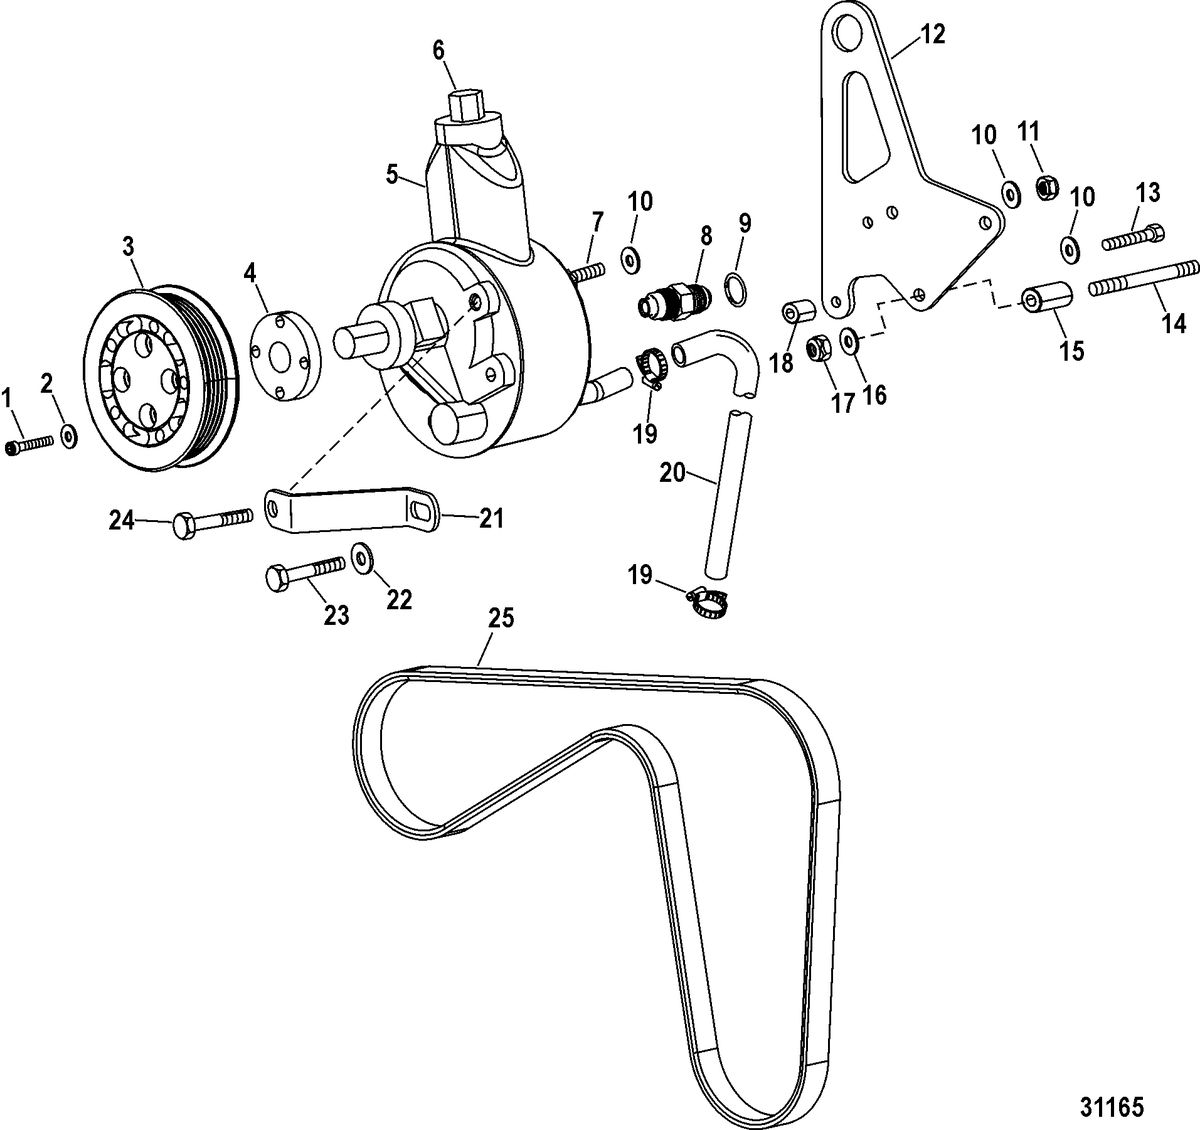 RACE STERNDRIVE 850 SCI Power-Assisted Steering Components(Design III)